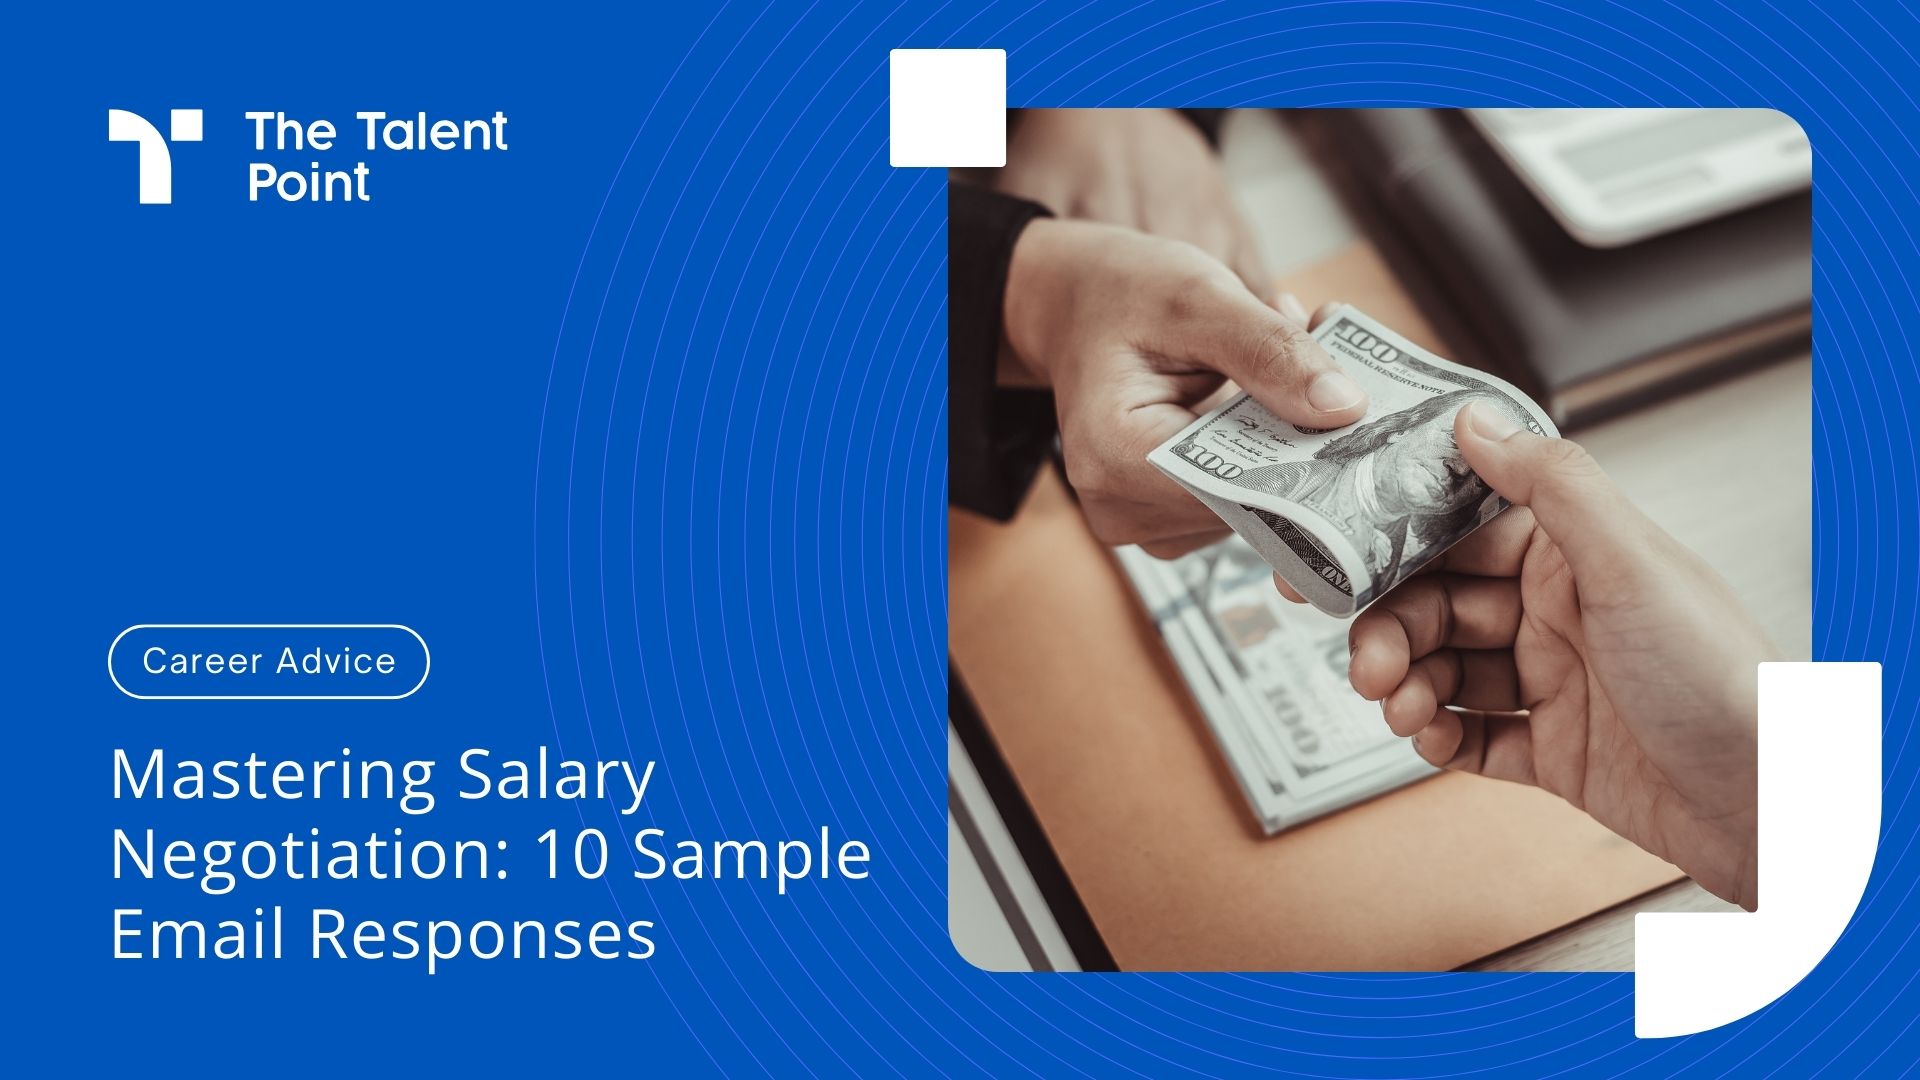 How to correspond salary negotiation offer via email with 10 sample